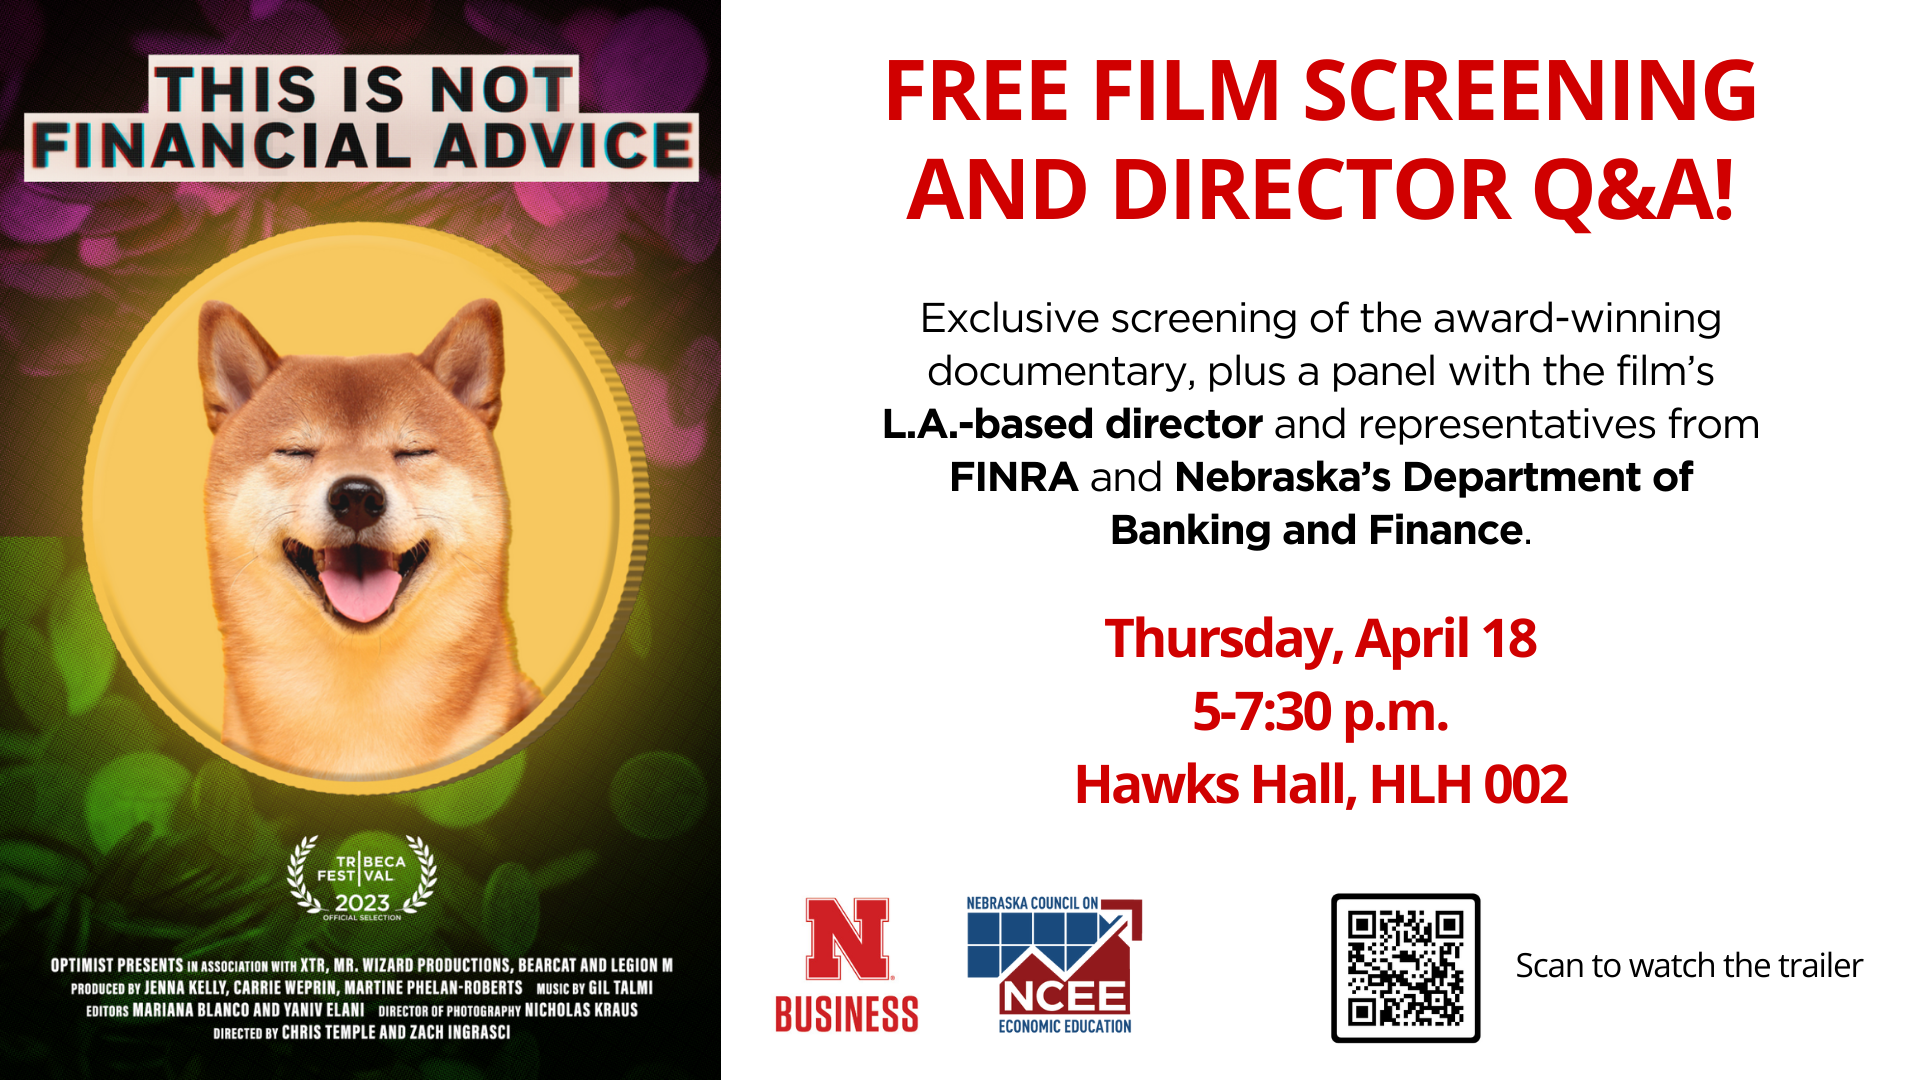 Free Film Screening and Director Q&A | Thursday, April 18, from 5-7:30 p.m. in HLH 002